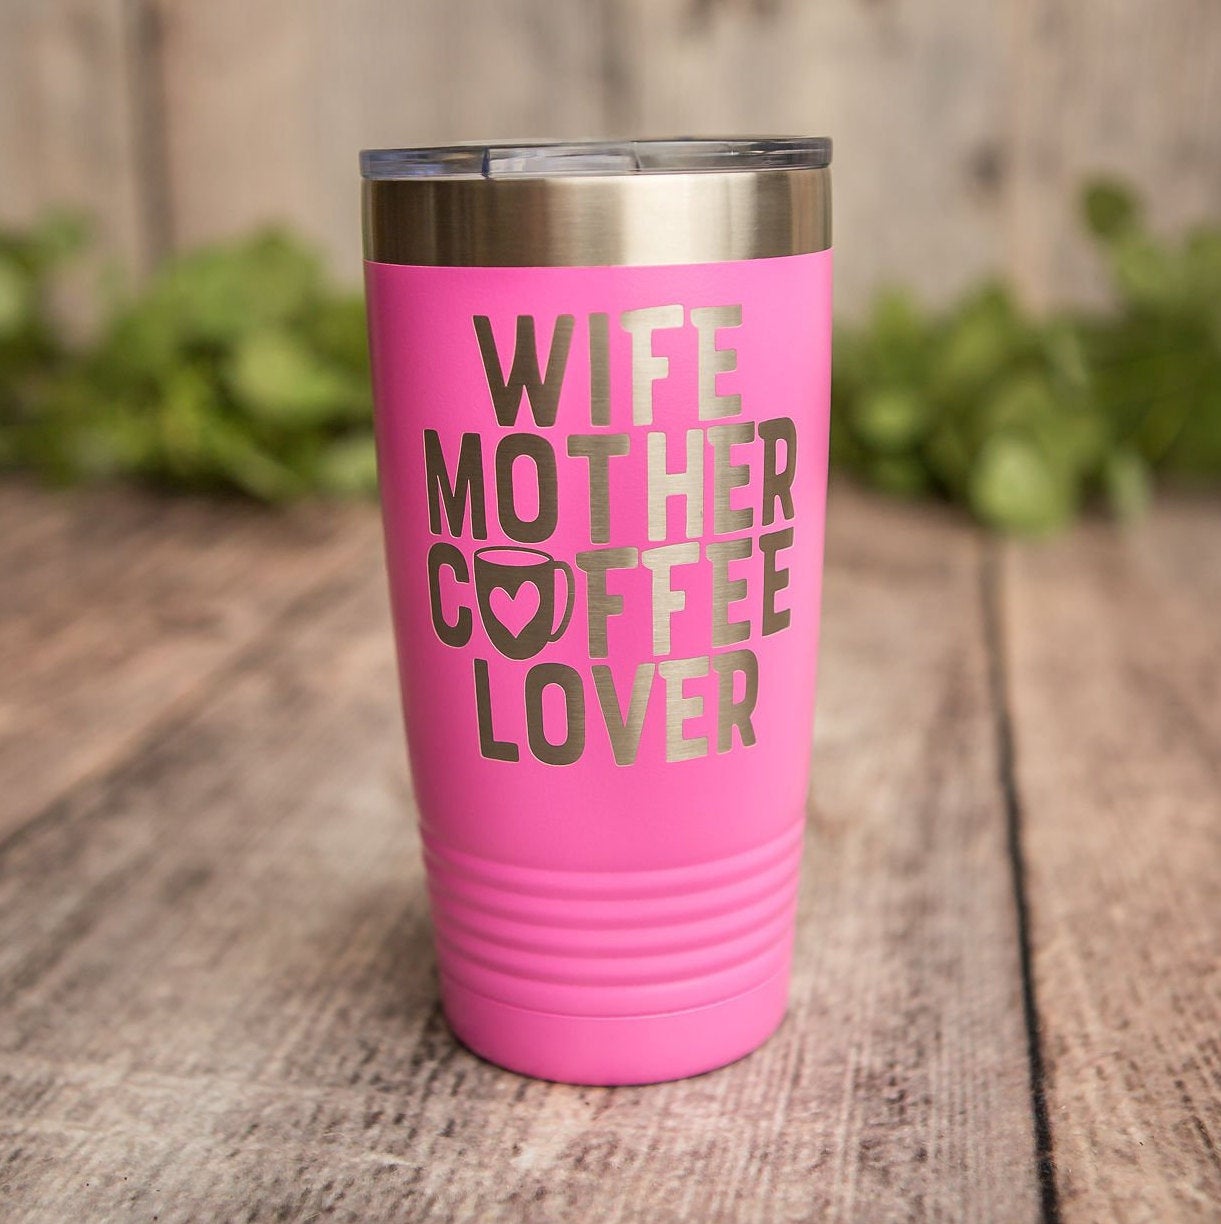 https://3cetching.com/wp-content/uploads/2020/09/wife-mother-coffee-lover-engraved-stainless-steel-tumbler-yeti-style-cup-mothers-day-5f5faa74.jpg